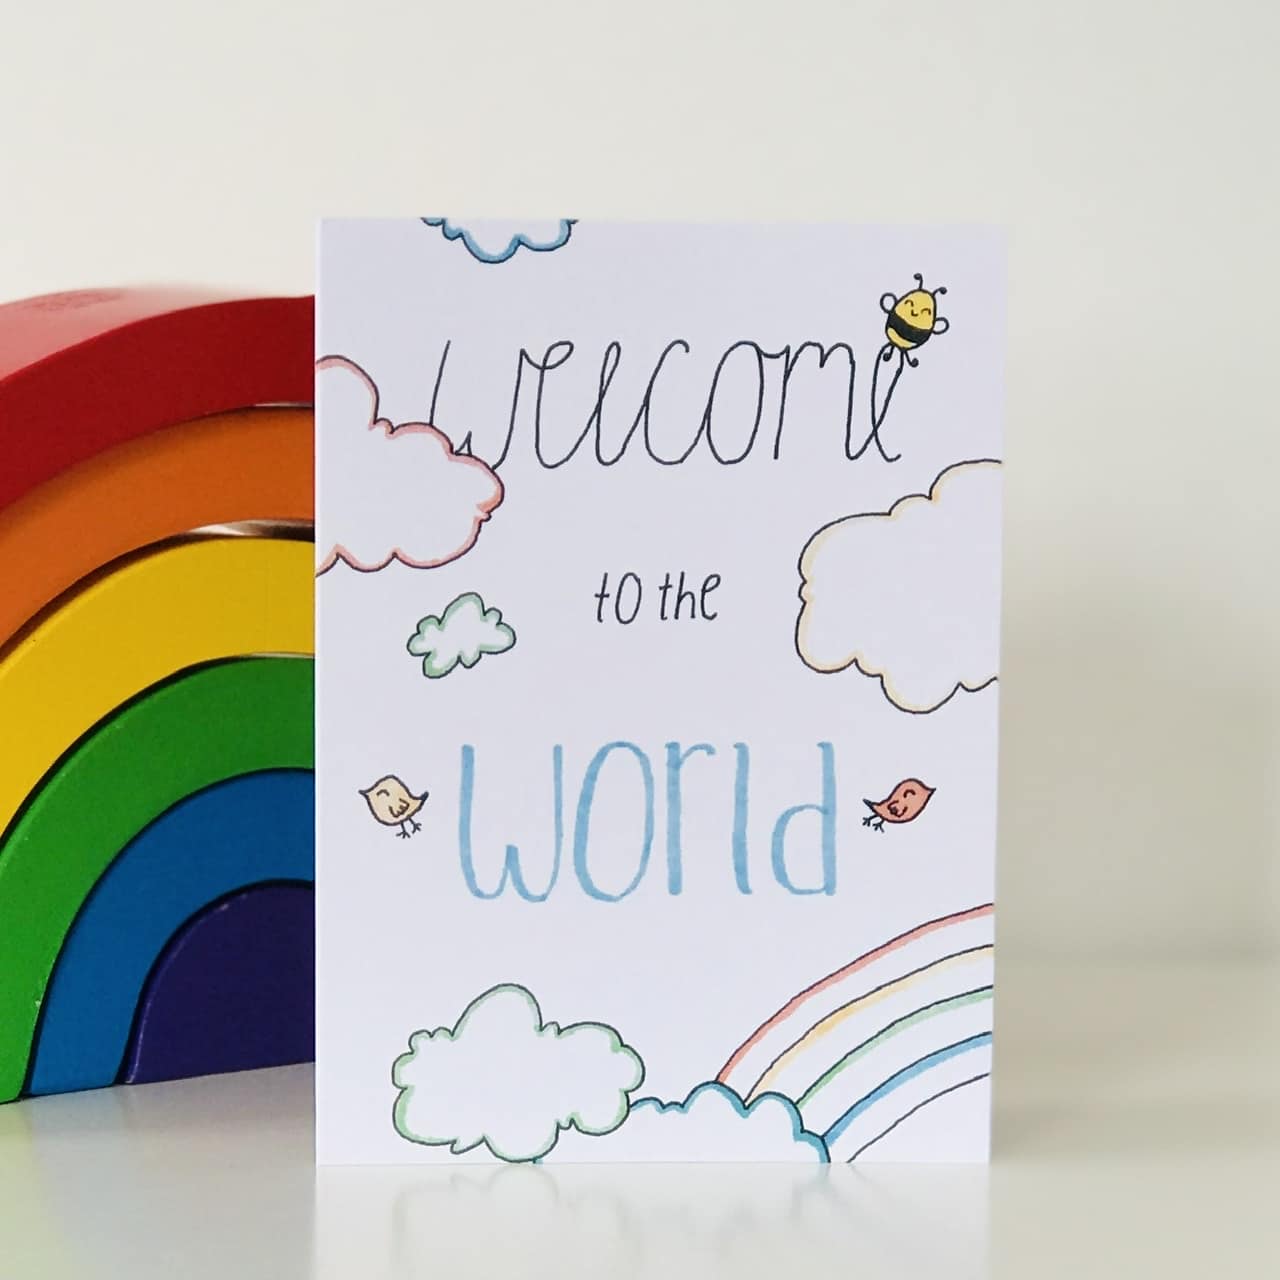 A Welcome to the World Card by Sweet Pea Creations is presented in front of a colorful wooden rainbow toy. The card features playful illustrations of clouds, a sun, and.